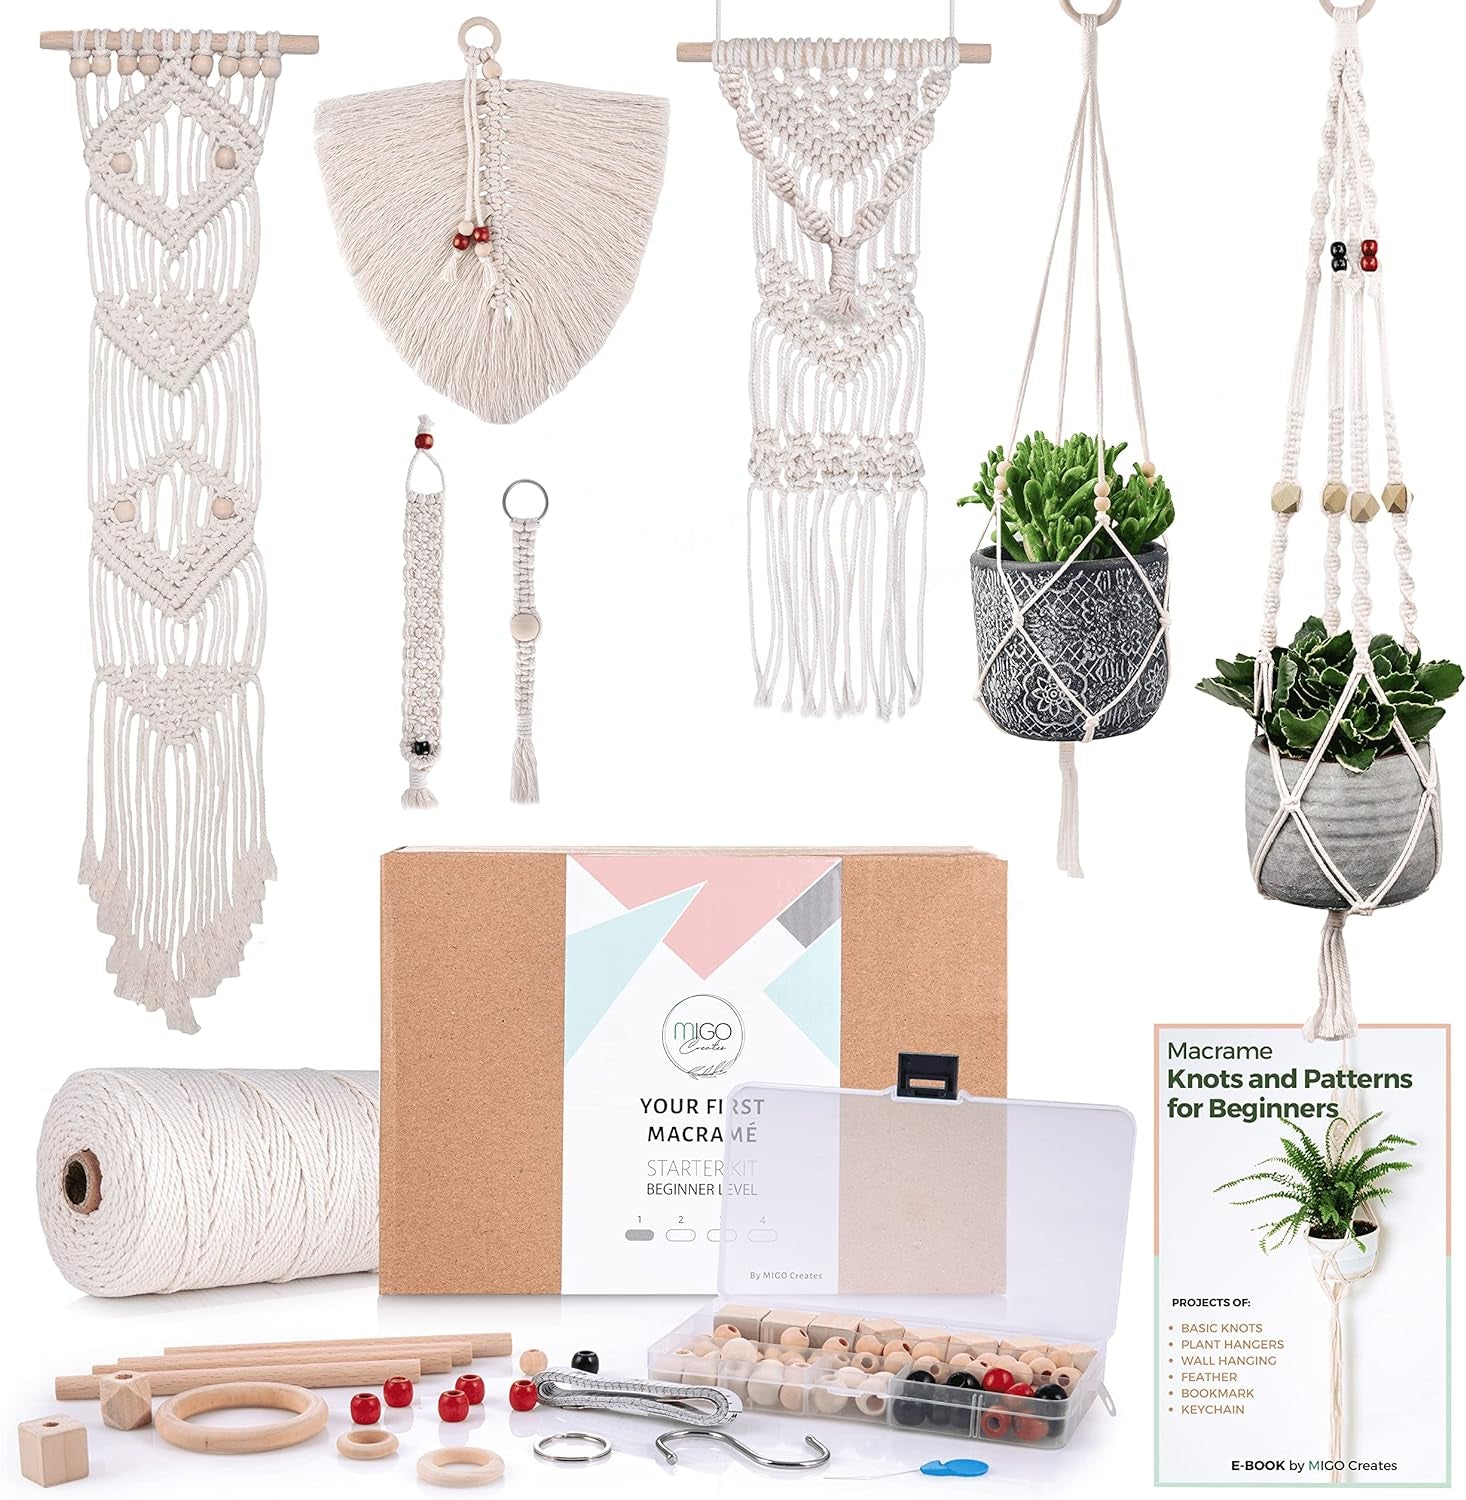 Macrame Kits for Adults Beginners with 126 Macrame Supplies and 7 Projects E-Book: DIY Macrame Kit with 165 Yards Macrame Cord and Craft Supplies & Materials to Start Macrame!